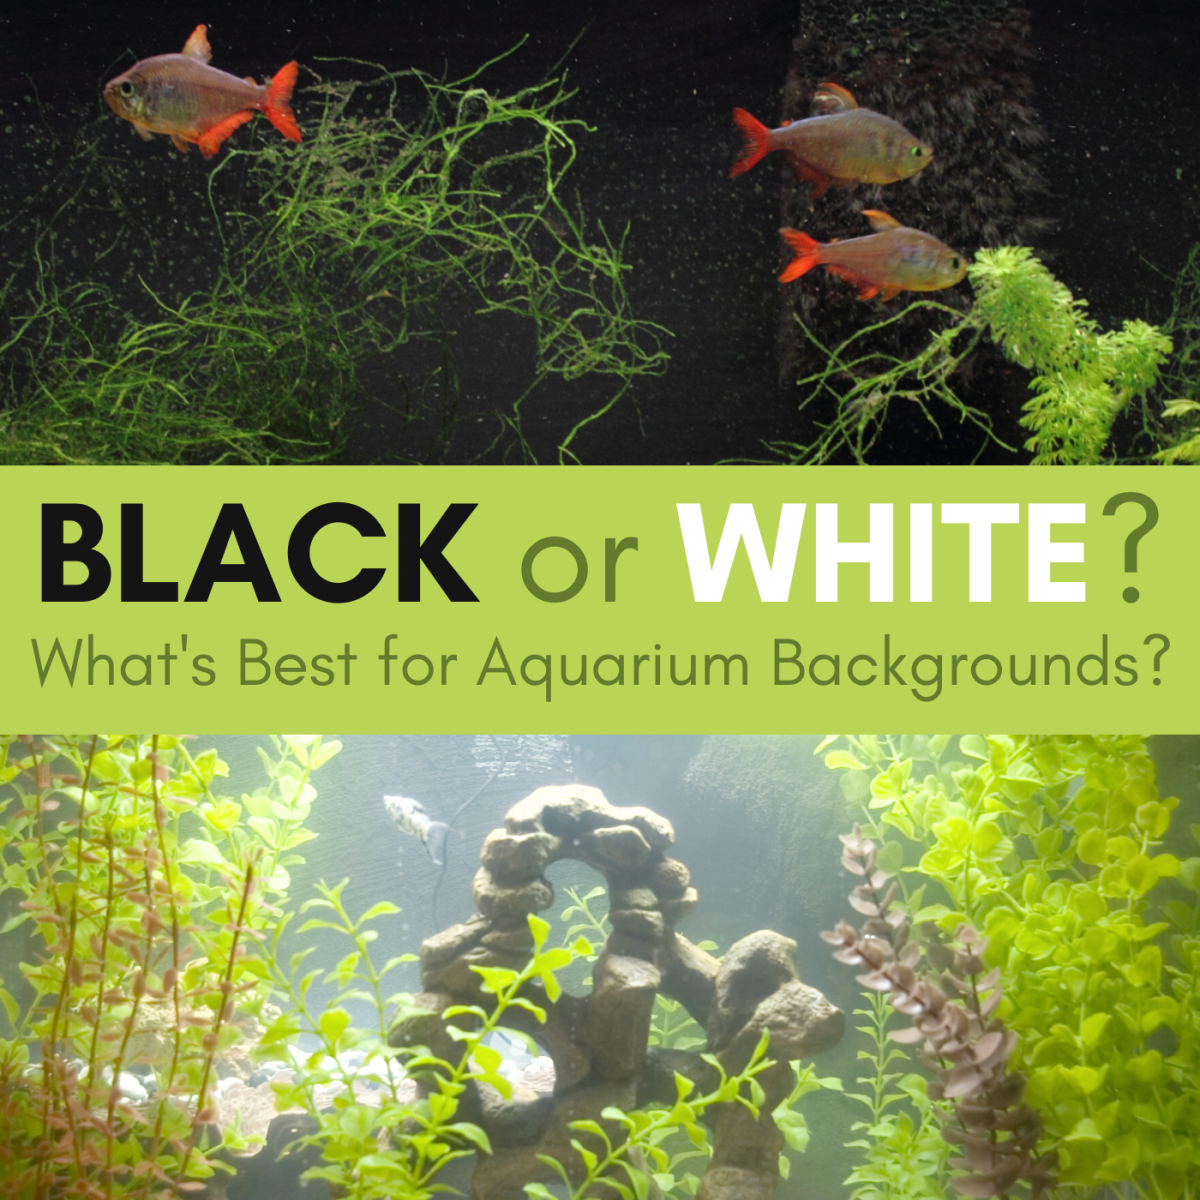 Black or White: Which Is Better for Aquarium Backgrounds?